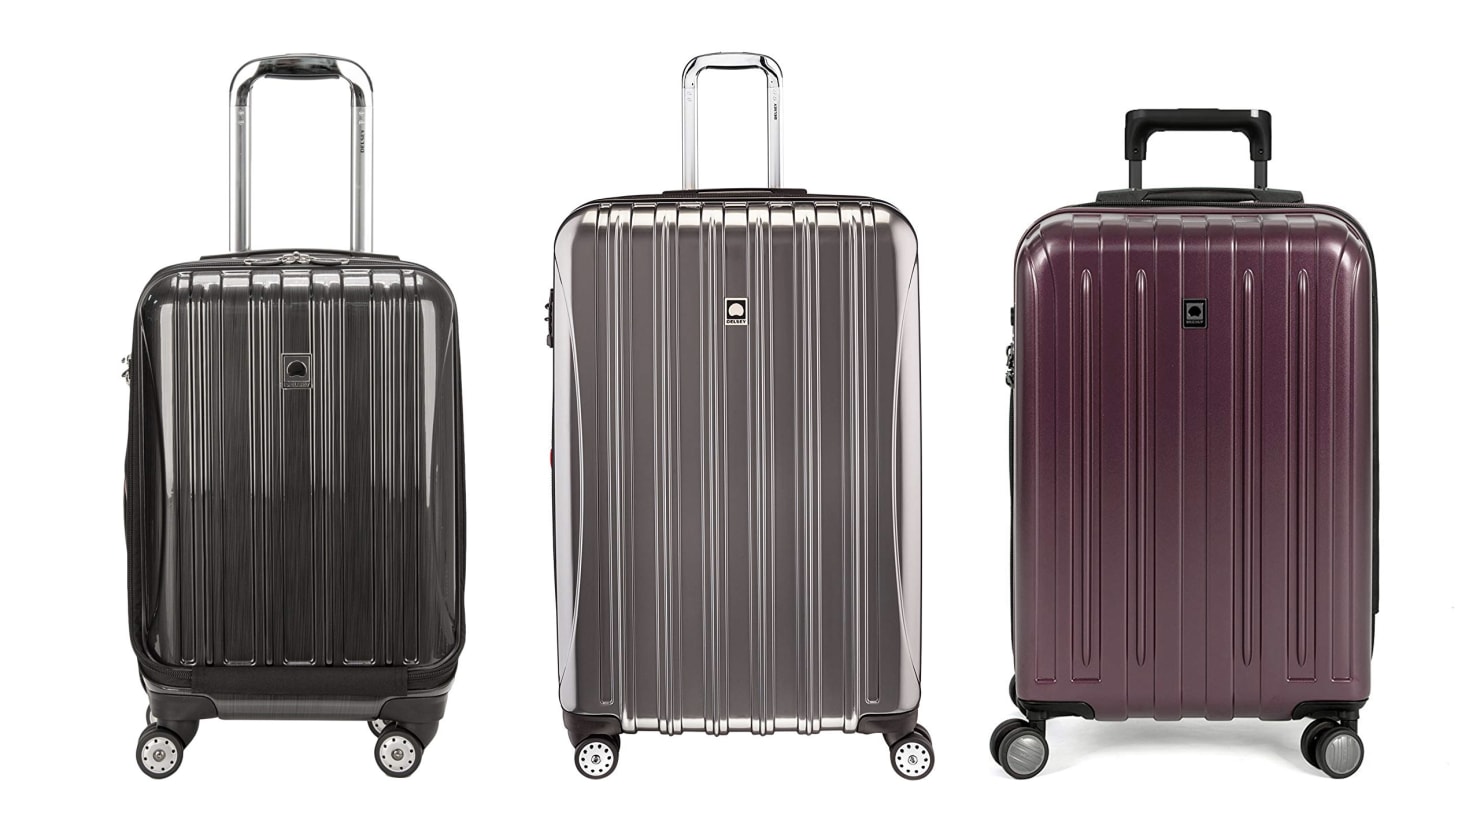 Save Big on Delsey Luggage During this One-Day Amazon Sale